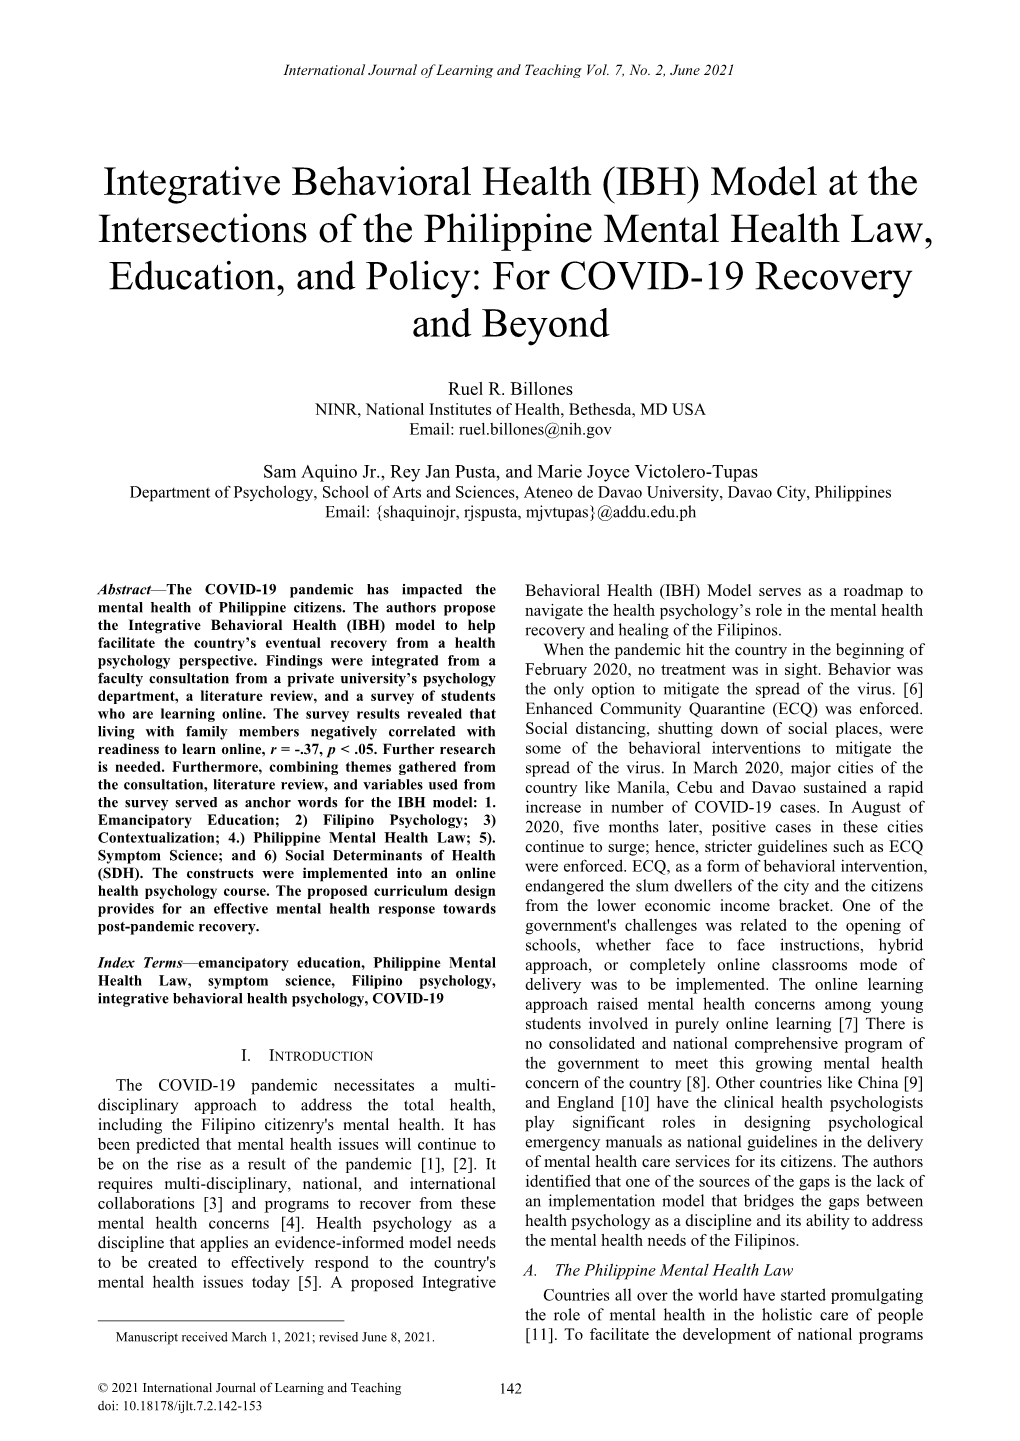 Integrative Behavioral Health (IBH) Model at the Intersections of the Philippine Mental Health Law, Education, and Policy: for COVID-19 Recovery and Beyond